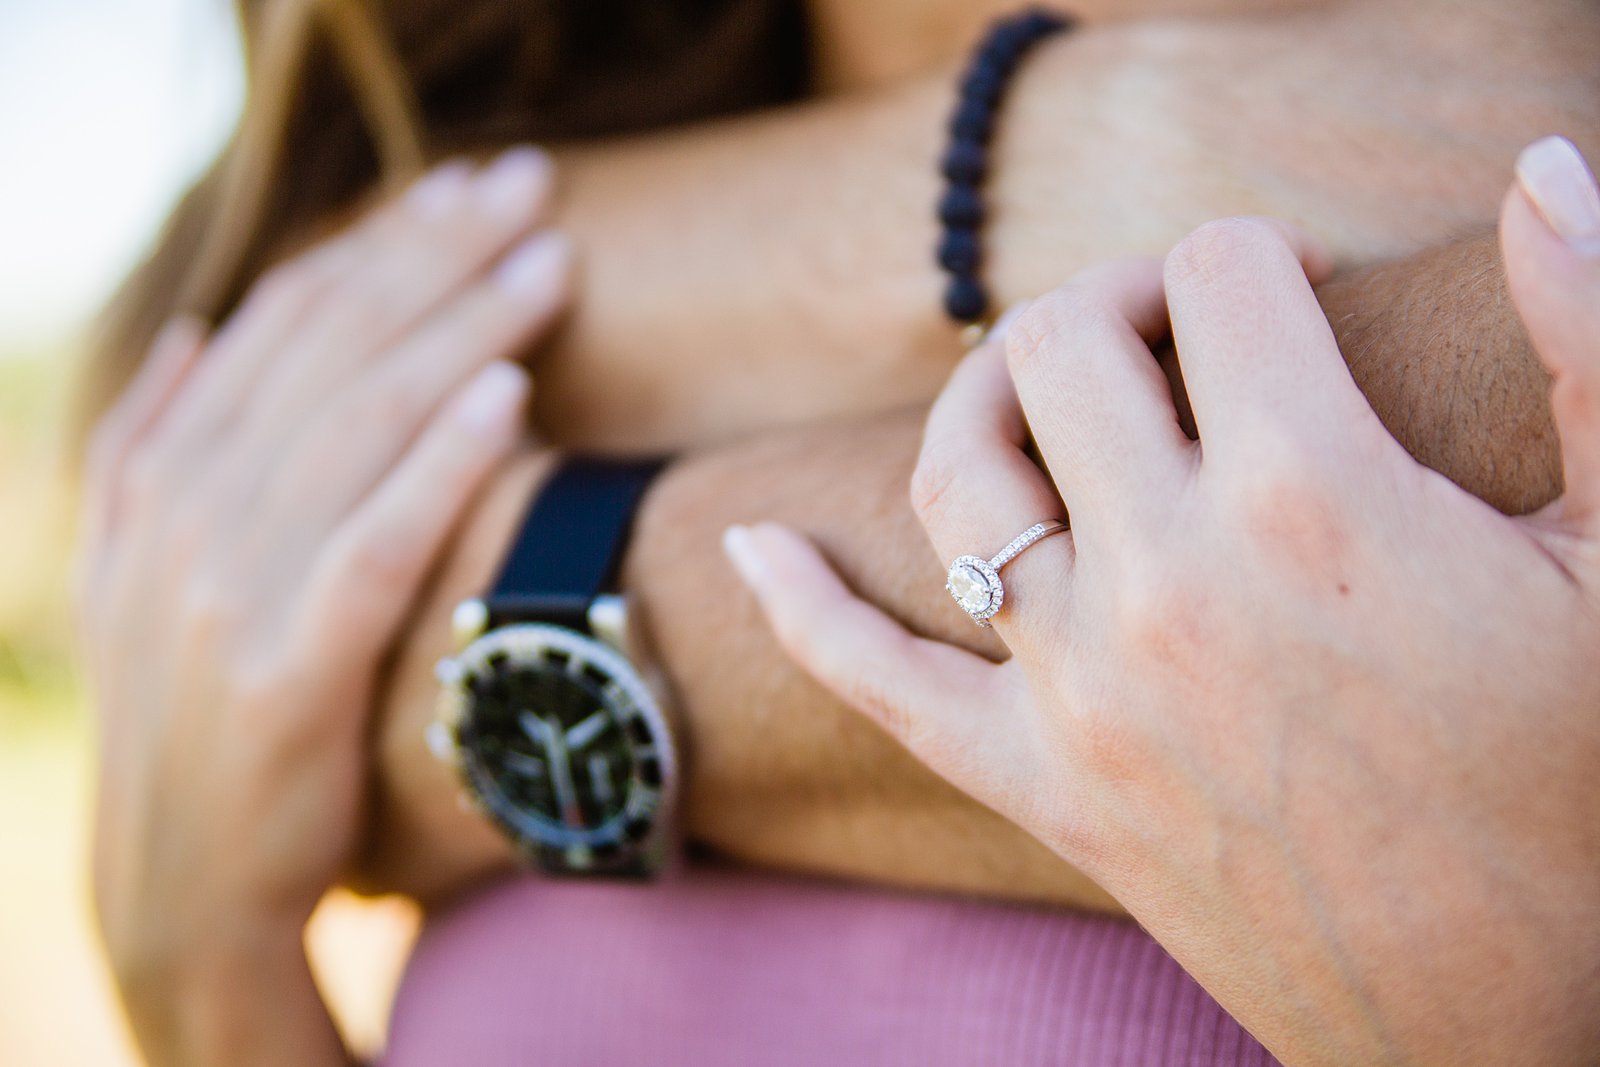 Detail image of engagement ring during during engagement session by PMA Photography.